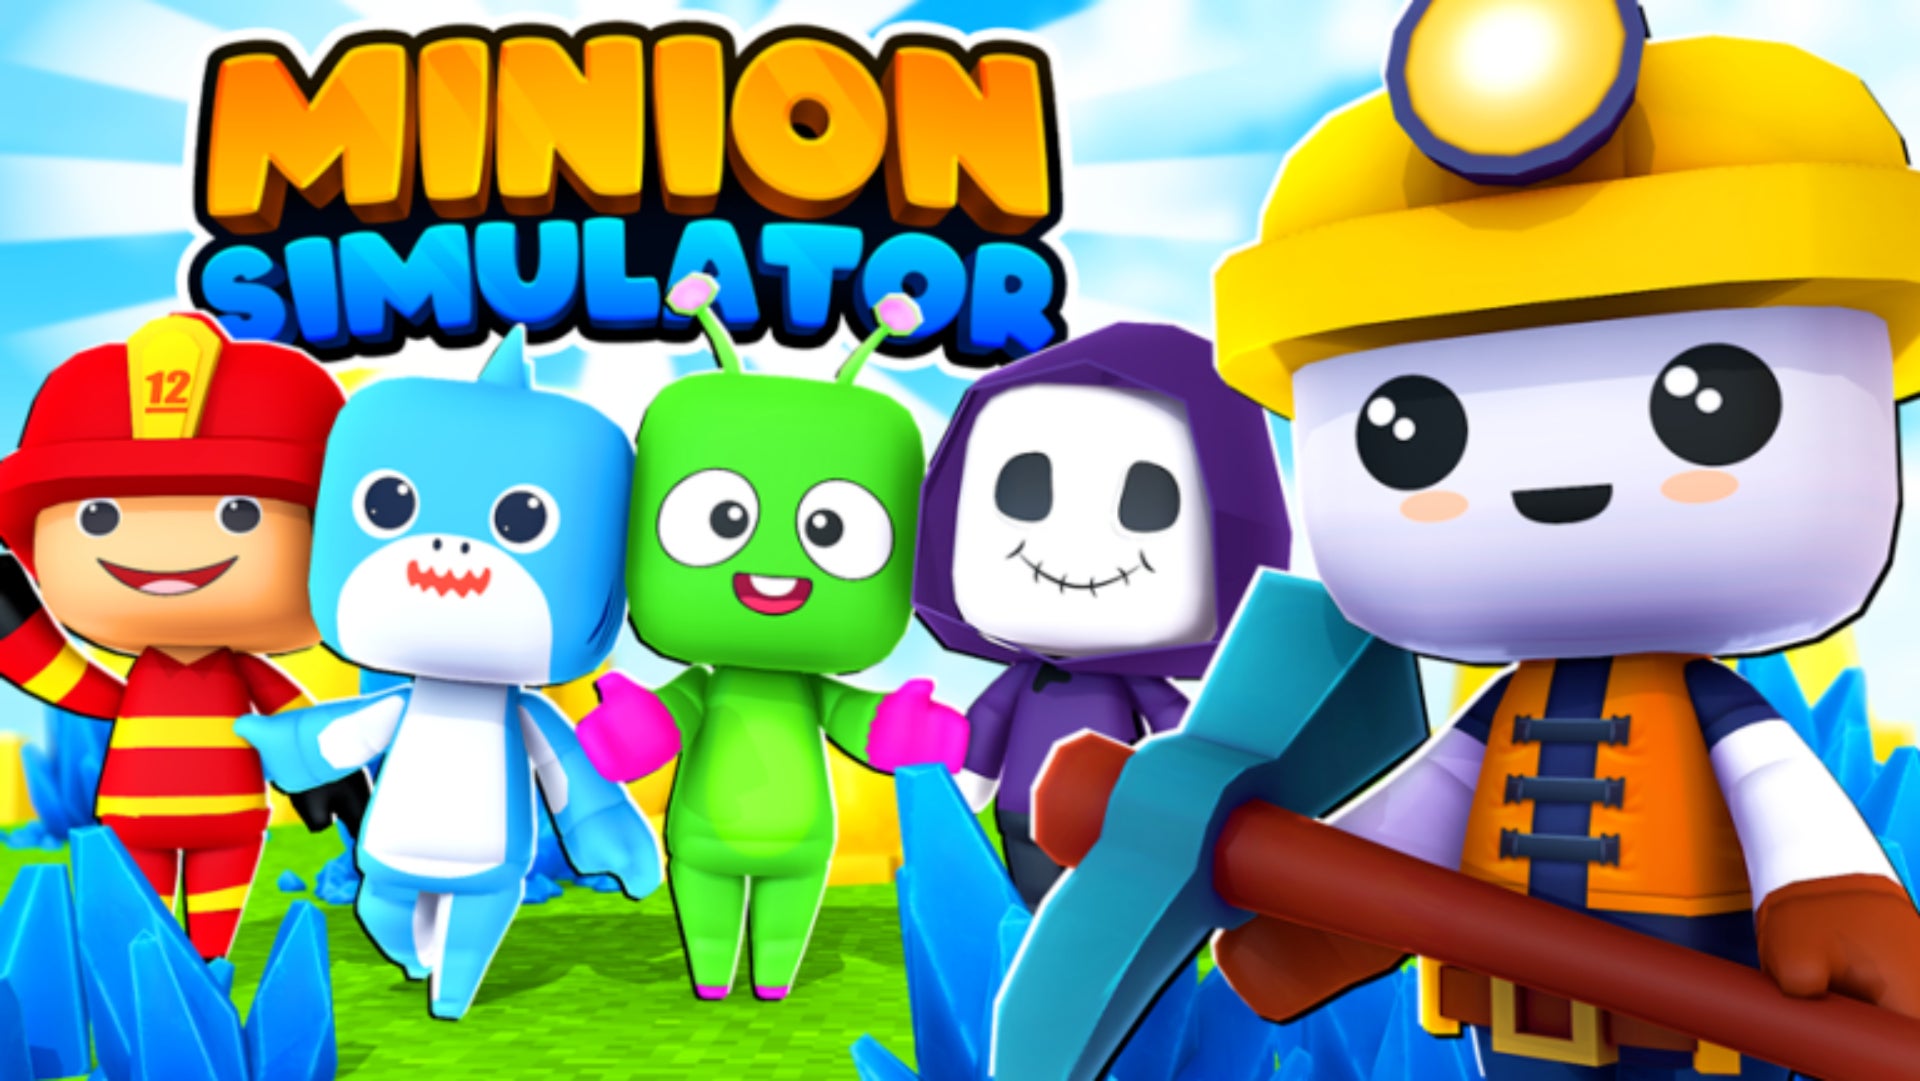 Roblox Minion Simulator Official Artwork, a Miner stands in the foreground and a fireman, shark, alien, and ghost are behind.